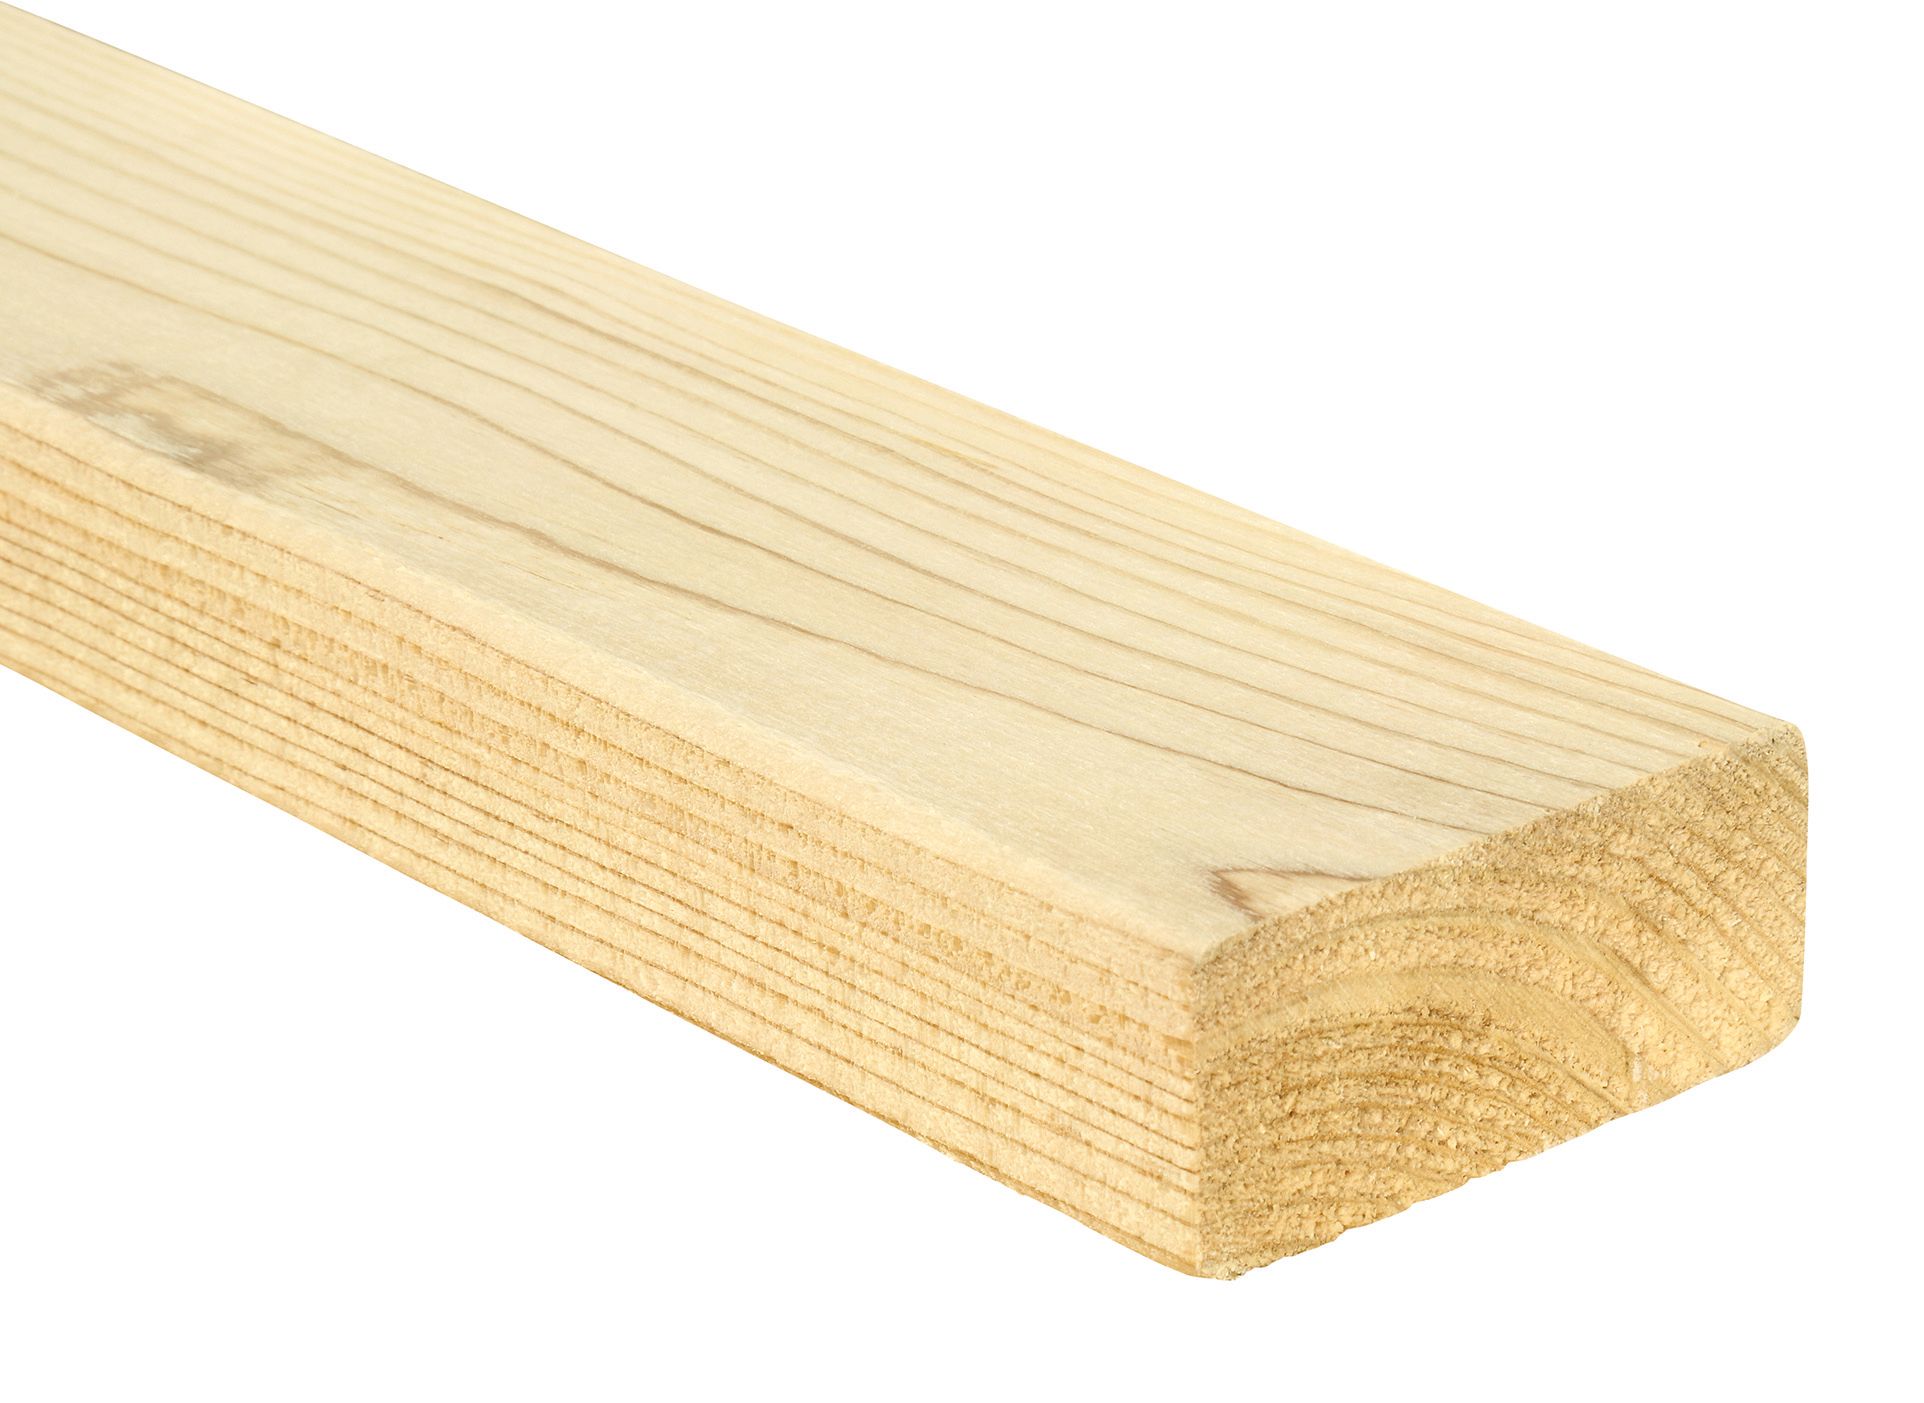 Image of Wickes FSC Certified Yellow Studwork CLS Untreated Timber Wood - 38x89x2400mm